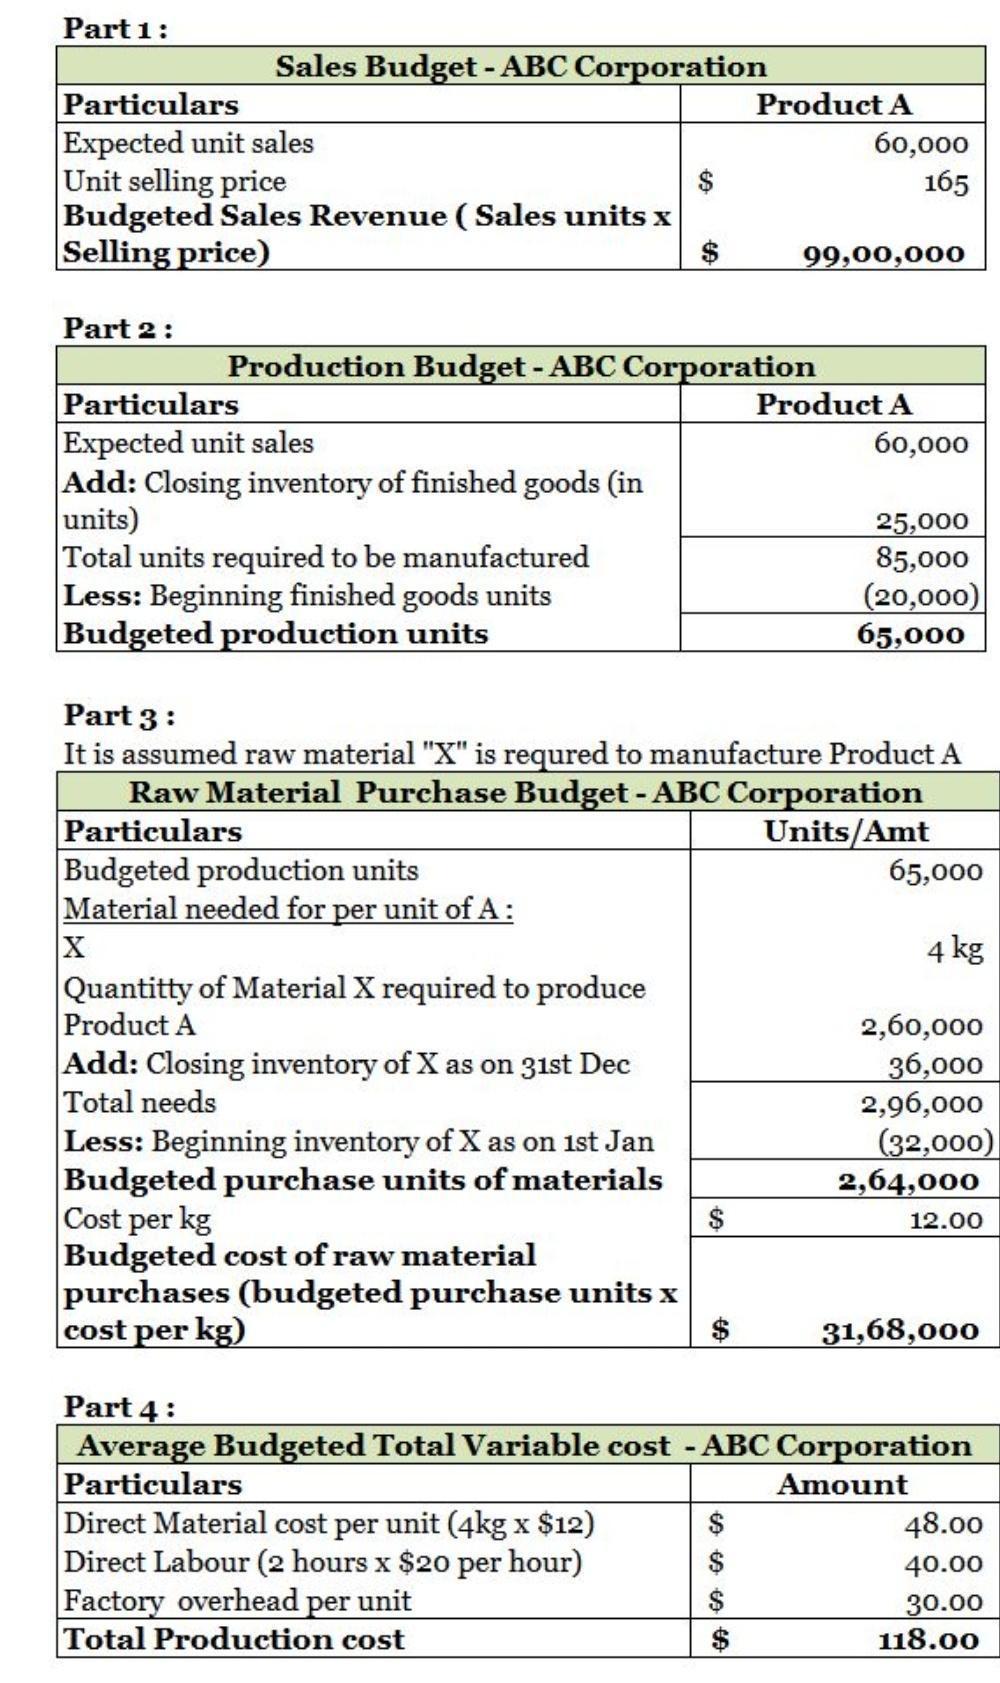 Part 1: Sales Budget - ABC Corporation Particulars Product A Expected unit sales 60,000 Unit selling price 165 Budgeted Sales